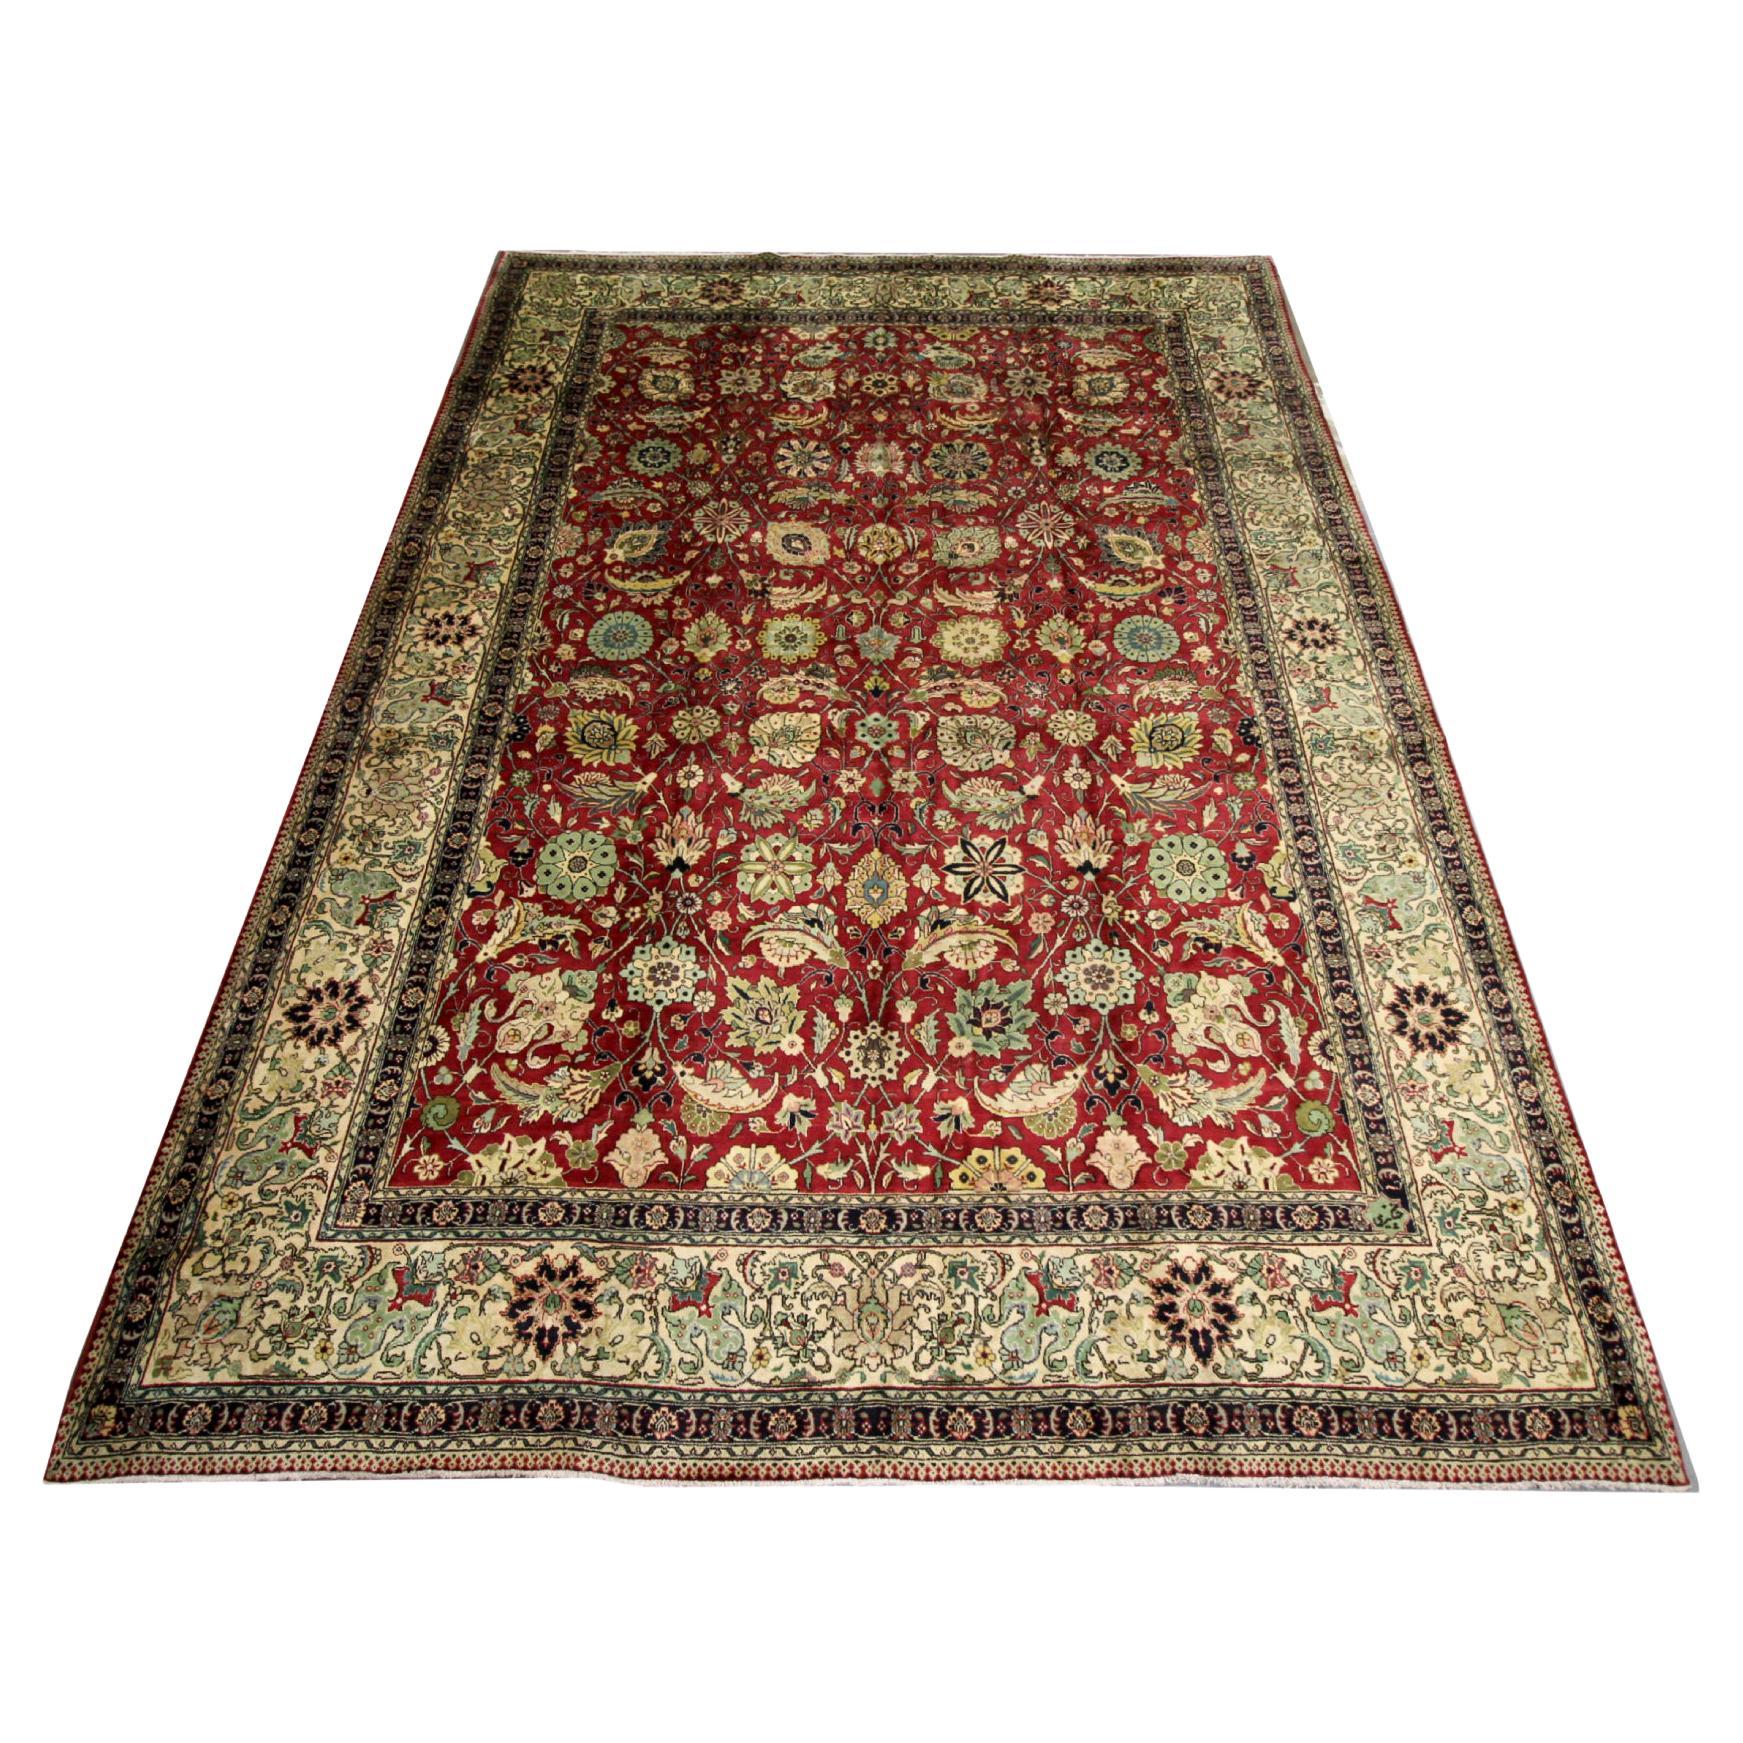 Large Vintage Rugs, Red All Over Carpet, Wool Living Room Rugs for Sale For Sale